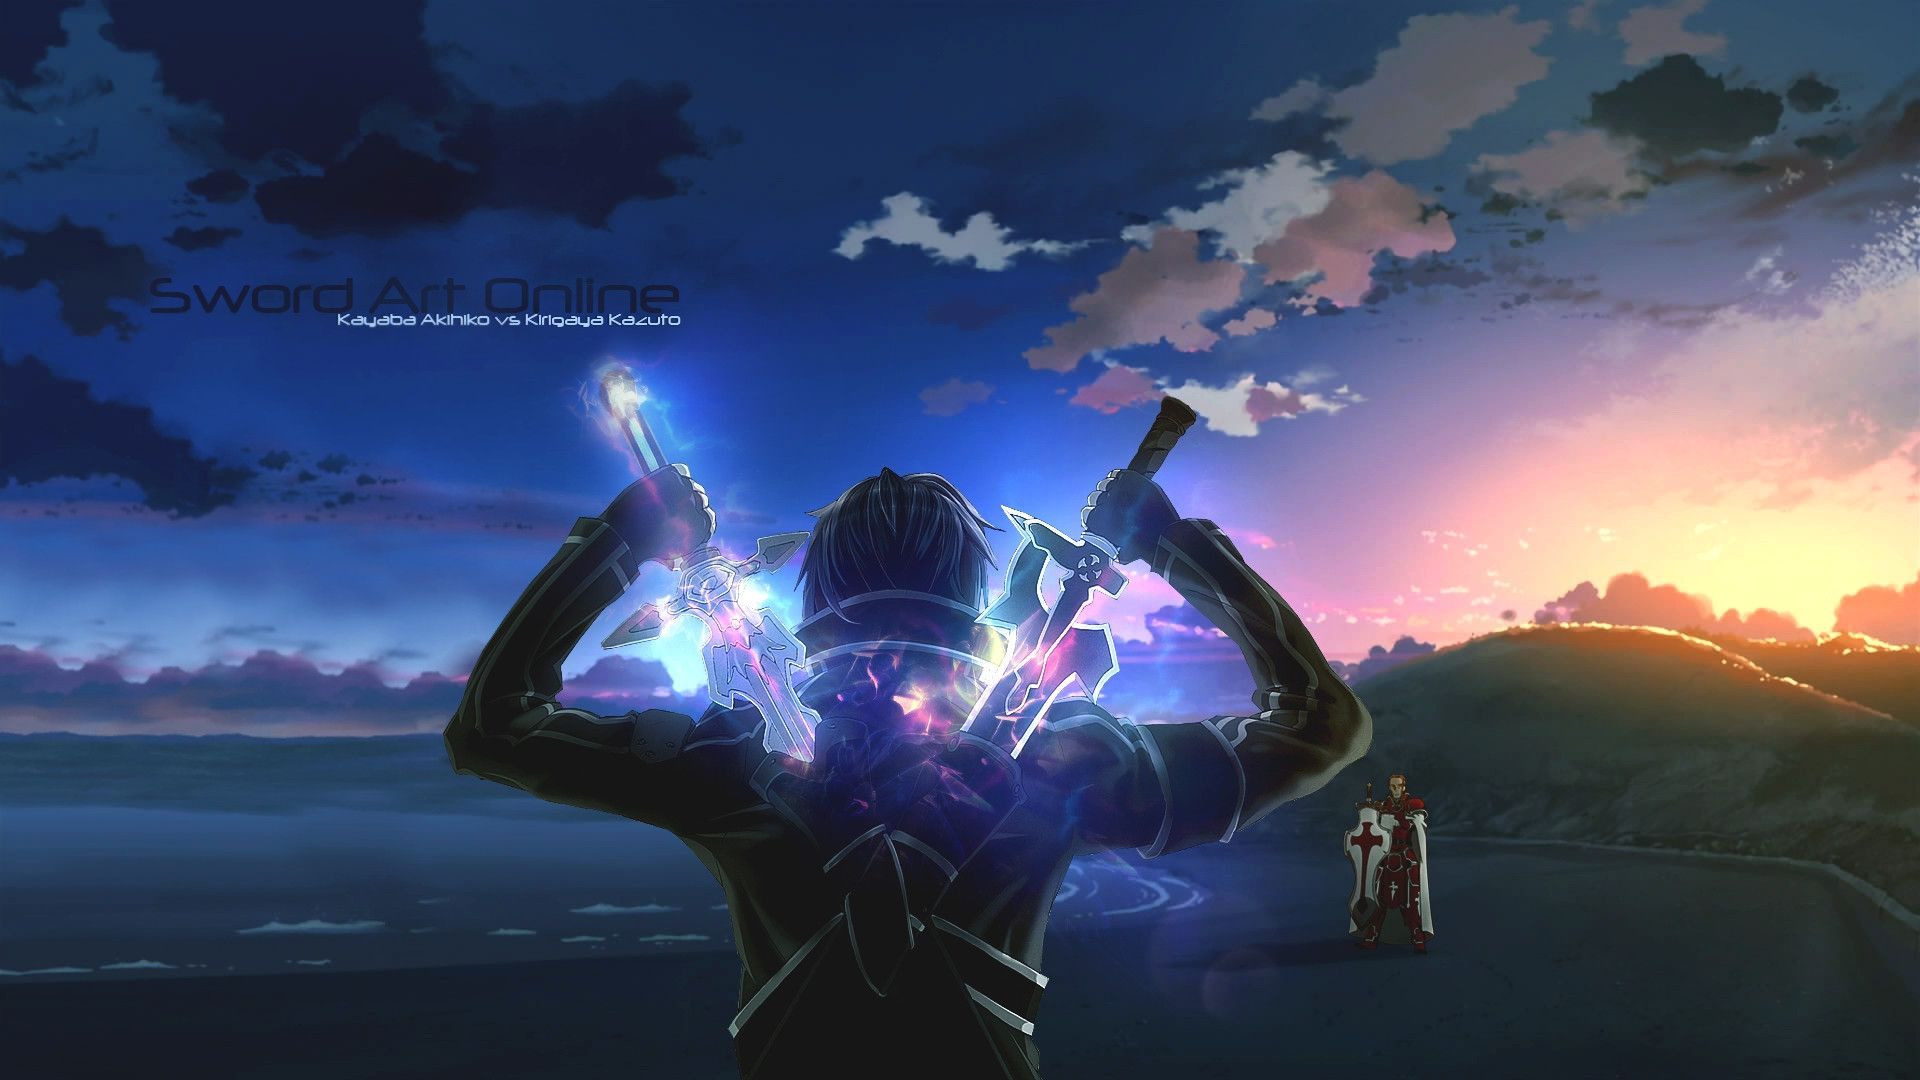 epic anime backgrounds #4